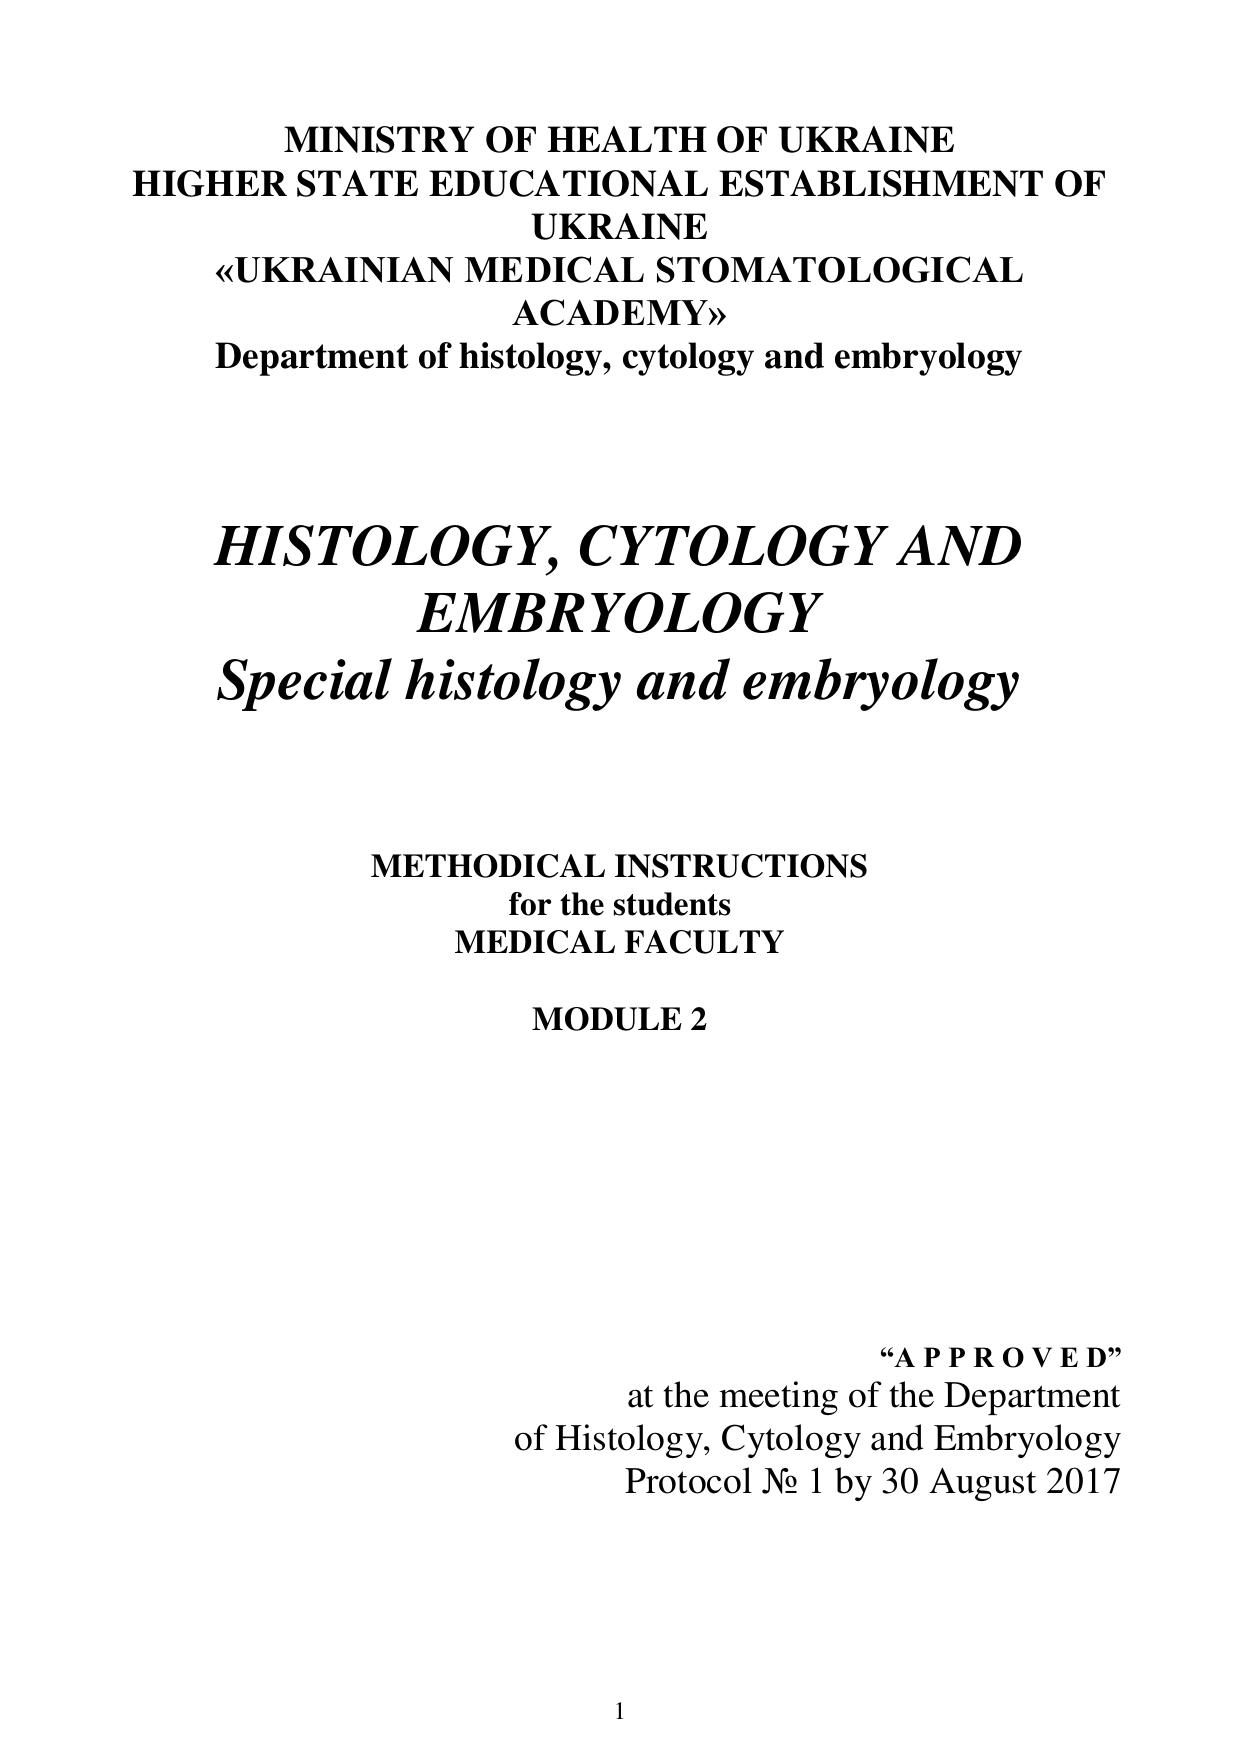 HISTOLOGY, CYTOLOGY AND EMBRYOLOGY MODULE 2 2017